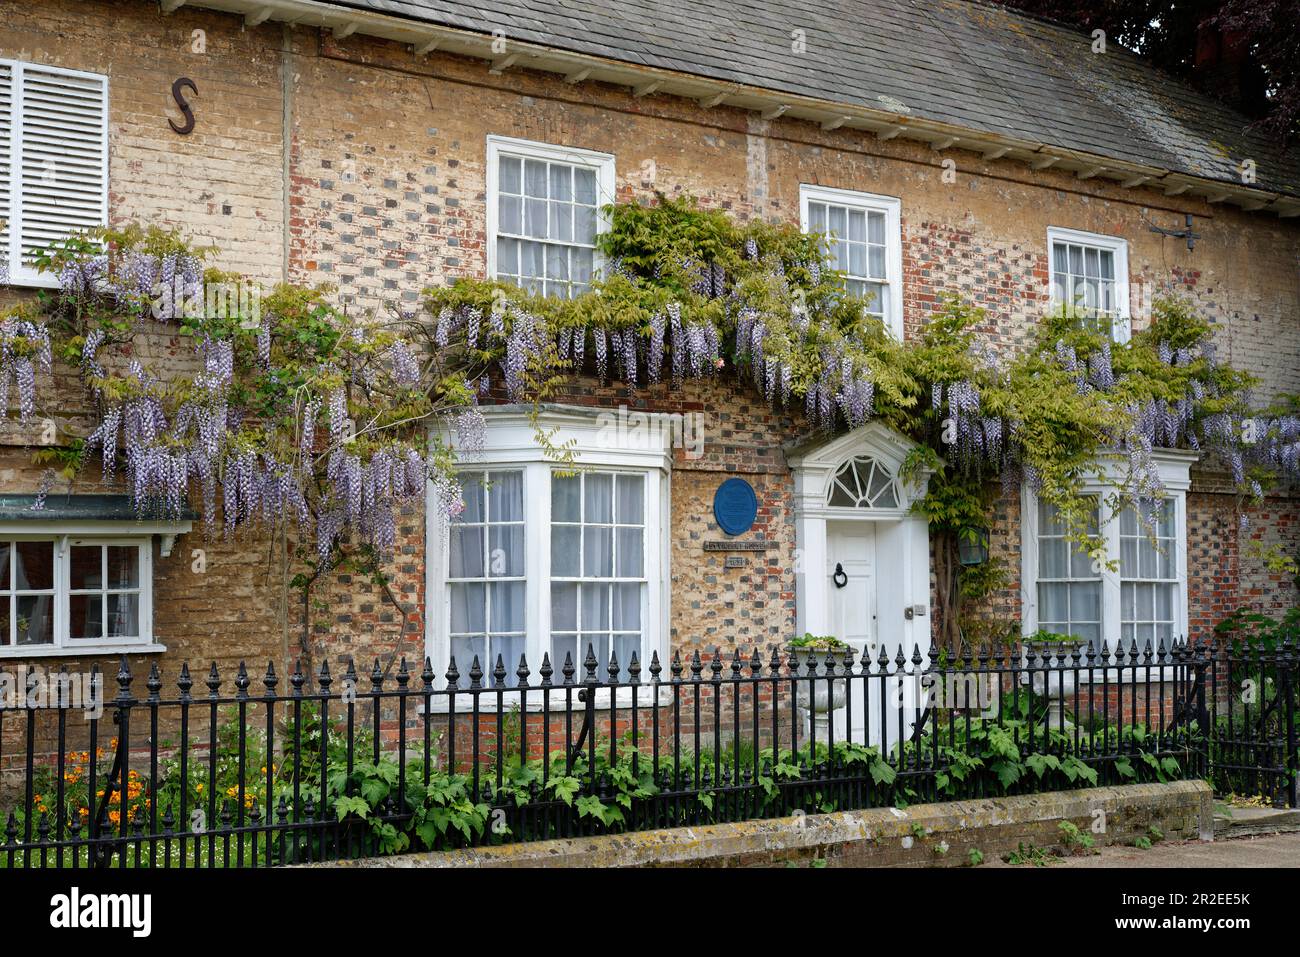 England in the Spring. Wysteria in full bloom. Houses in the village of Portchester. Pretty houses in Castle Street. Stock Photo